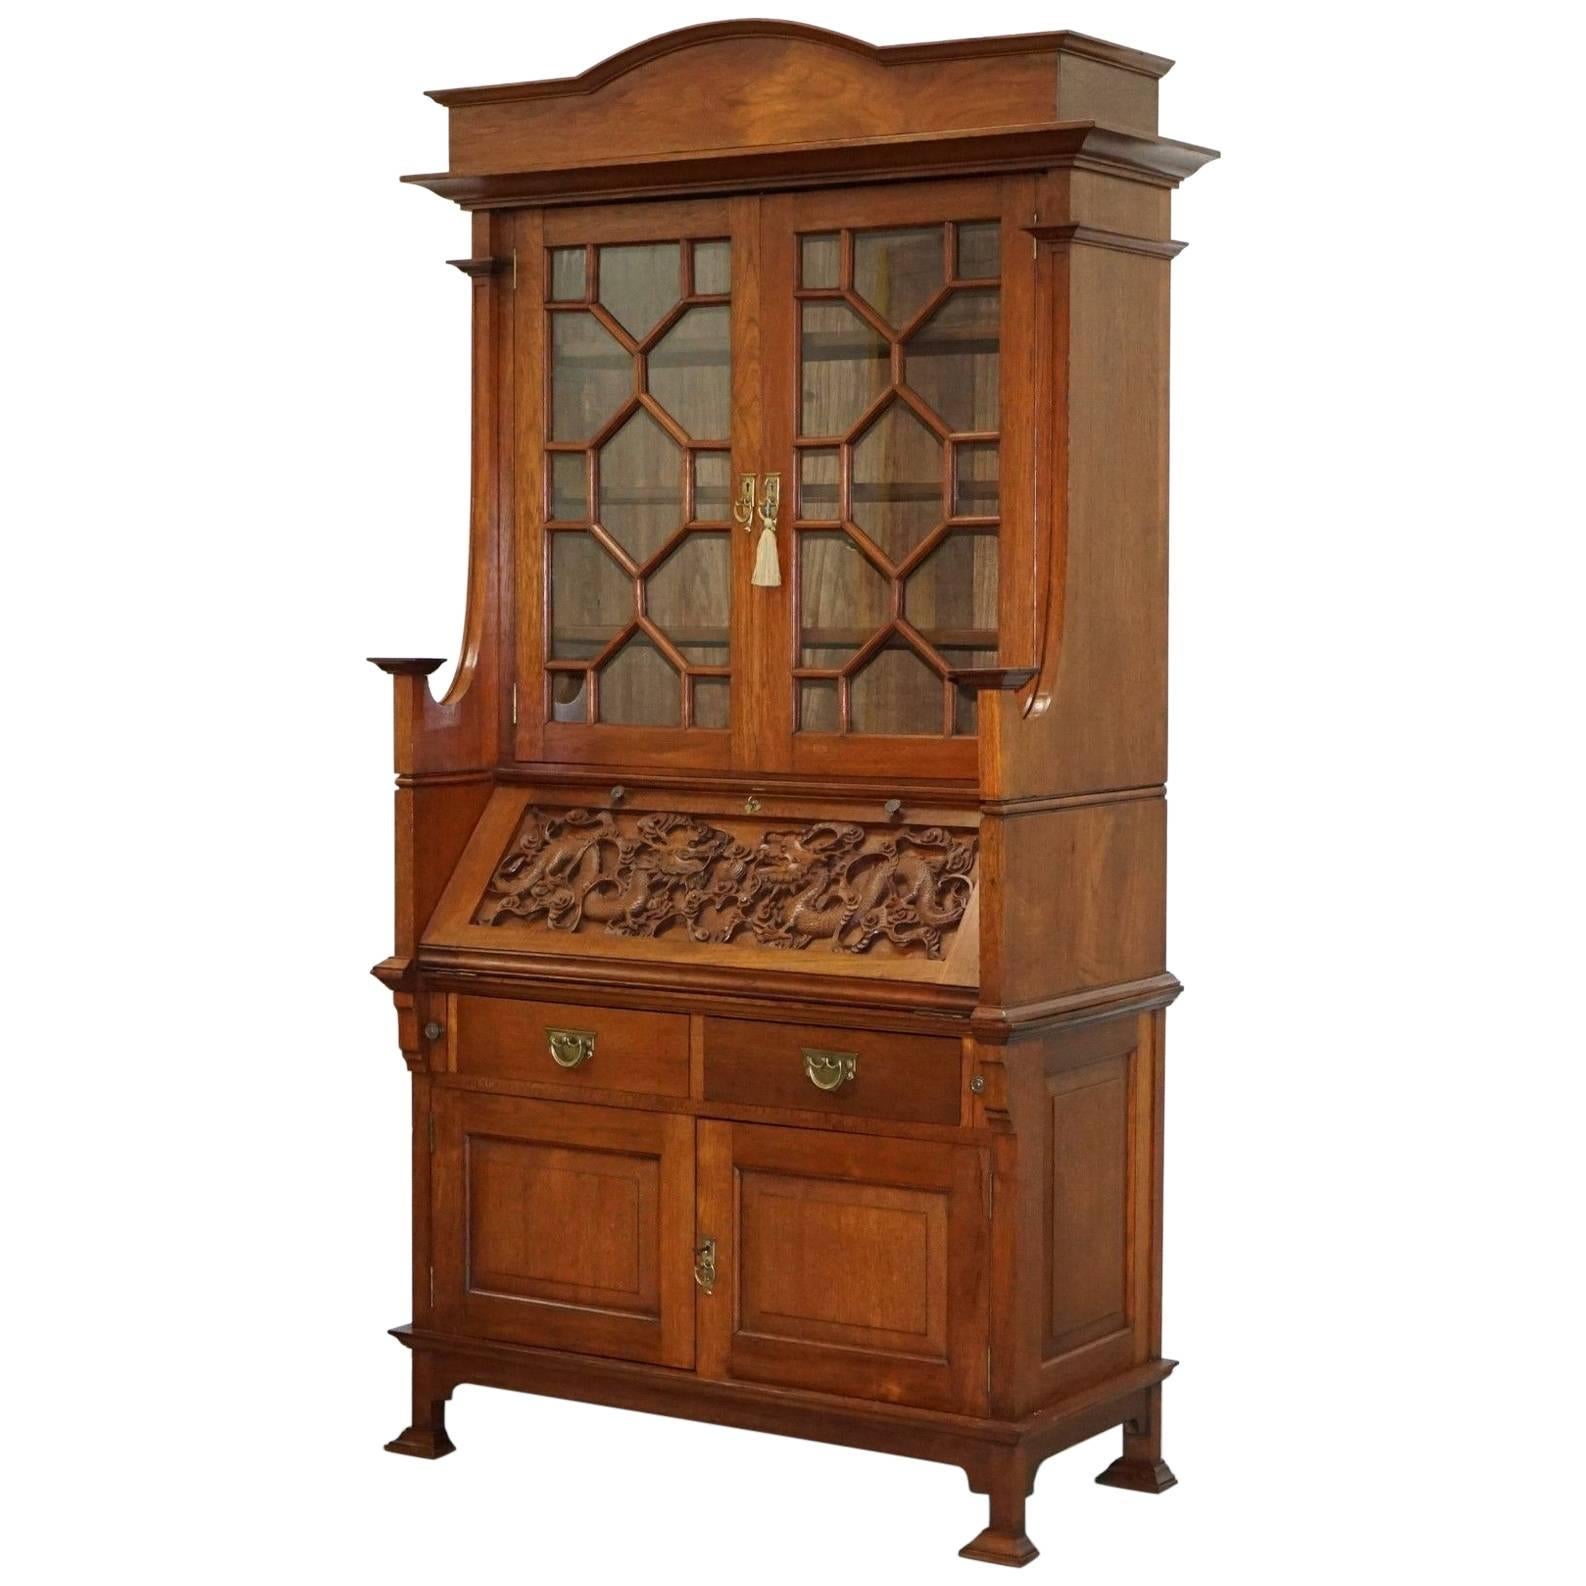 Rare Chinese Export Hand-Carved Dragon Bureau Bookcase Cabinet Solid Oak